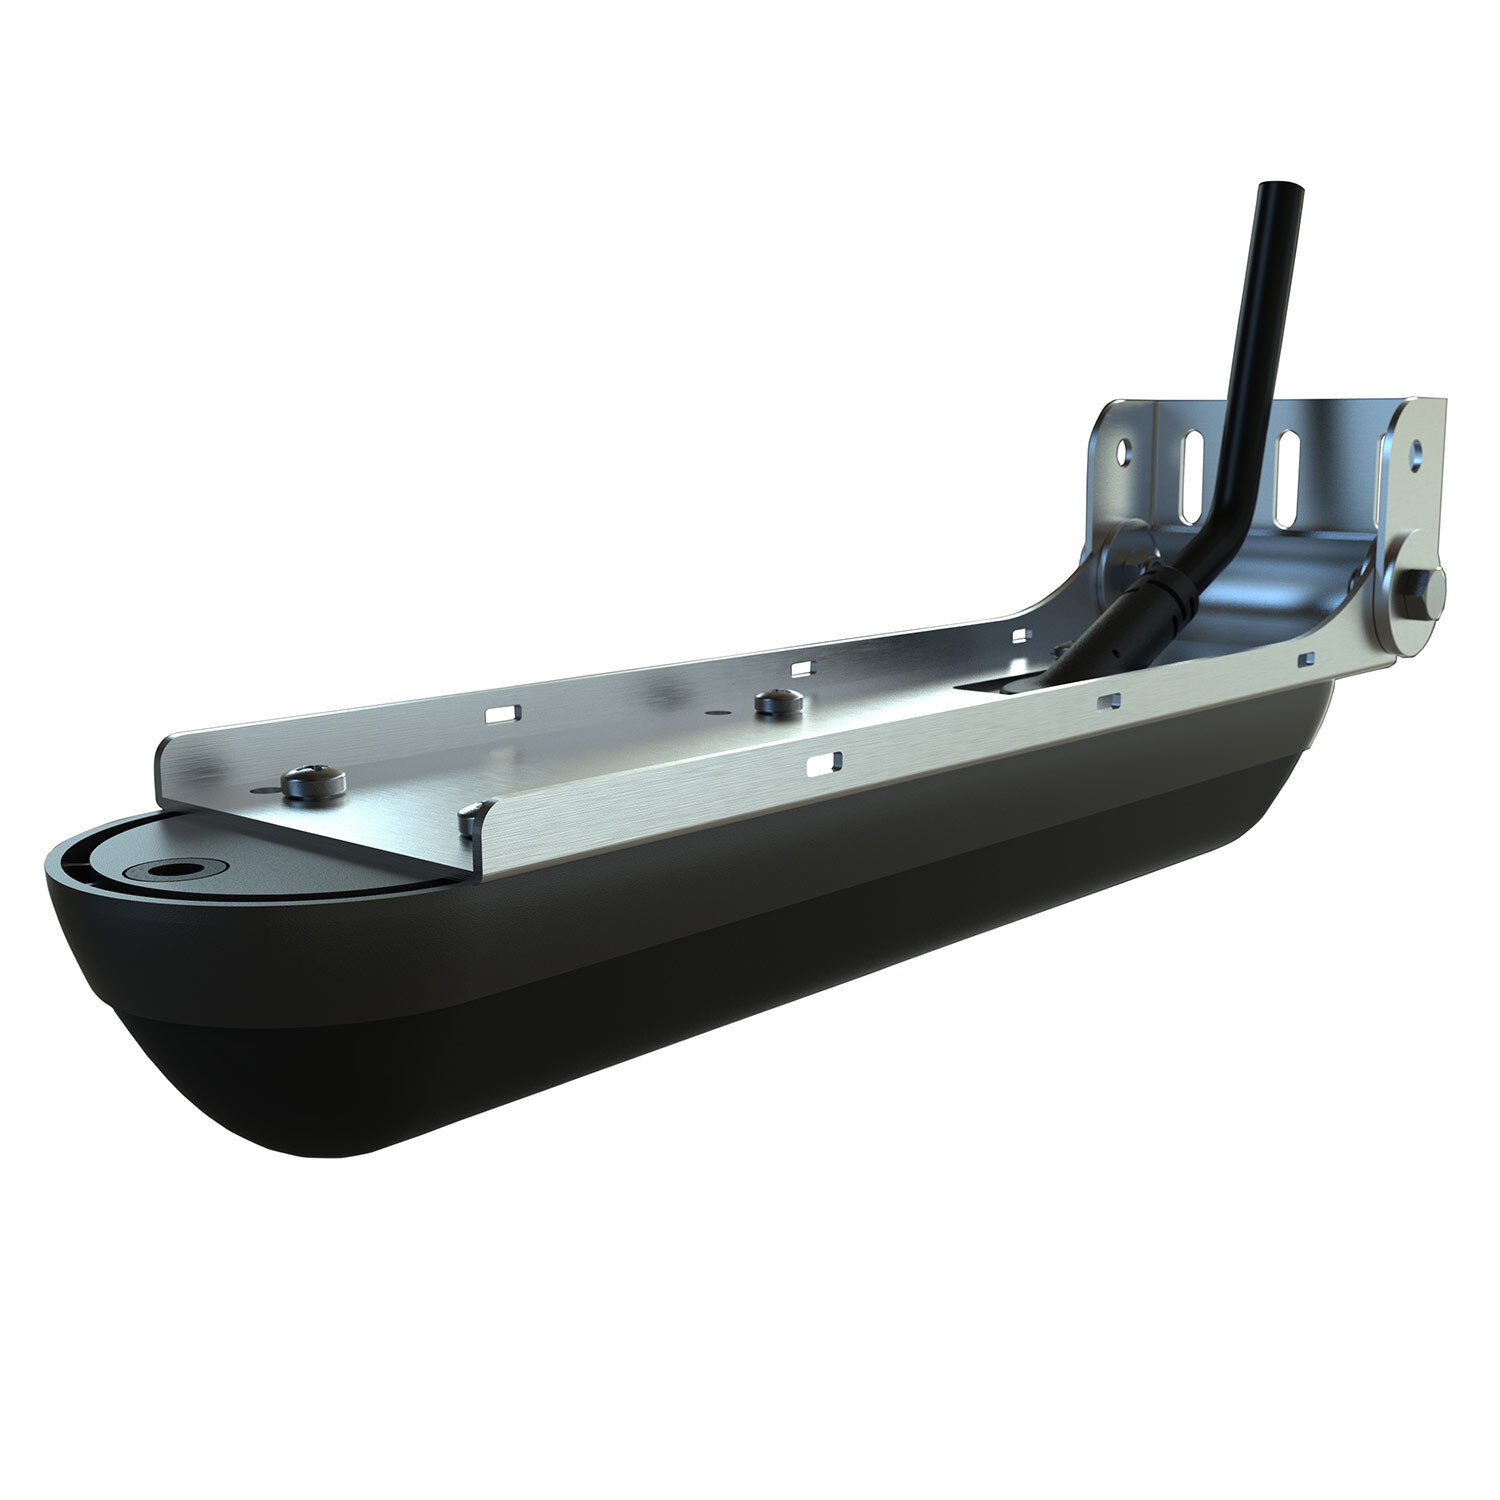 SIMRAD StructureScan 3D Module with Transducer | West Marine